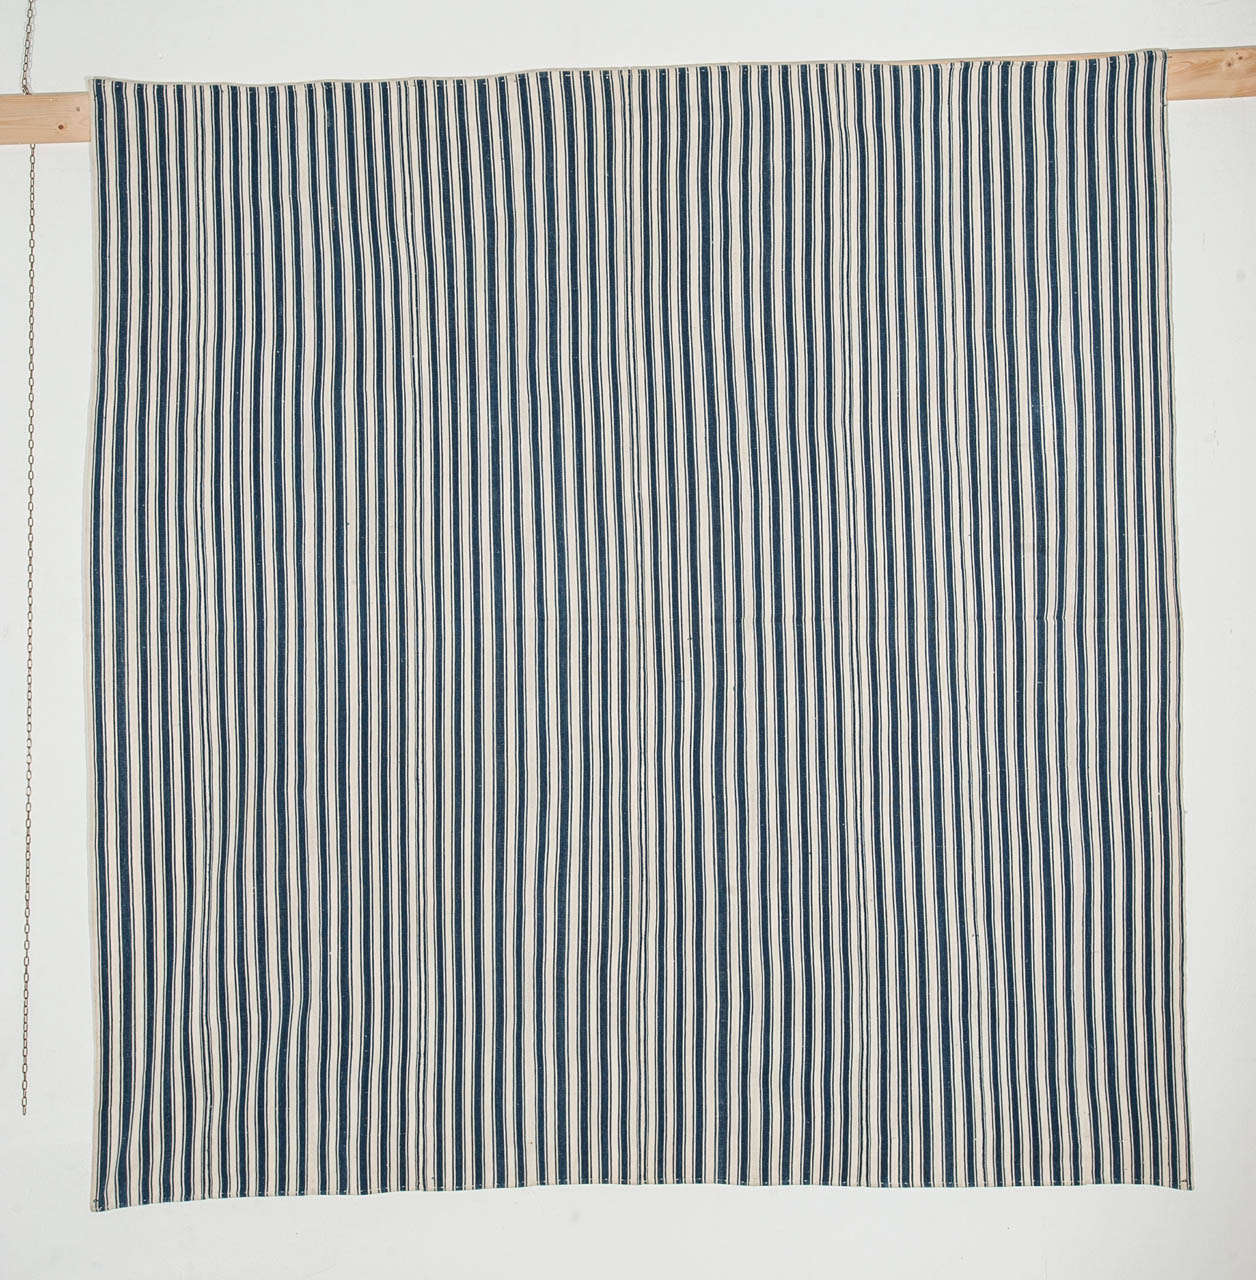 An ivory and indigo flat-weave, composed of various panels hand-sewn together, woven in the weft-substitution technique also known as Jajim. These flat-weaves were used in the tents of the Kurdish nomadic tribes inhabiting the mountainous regions of